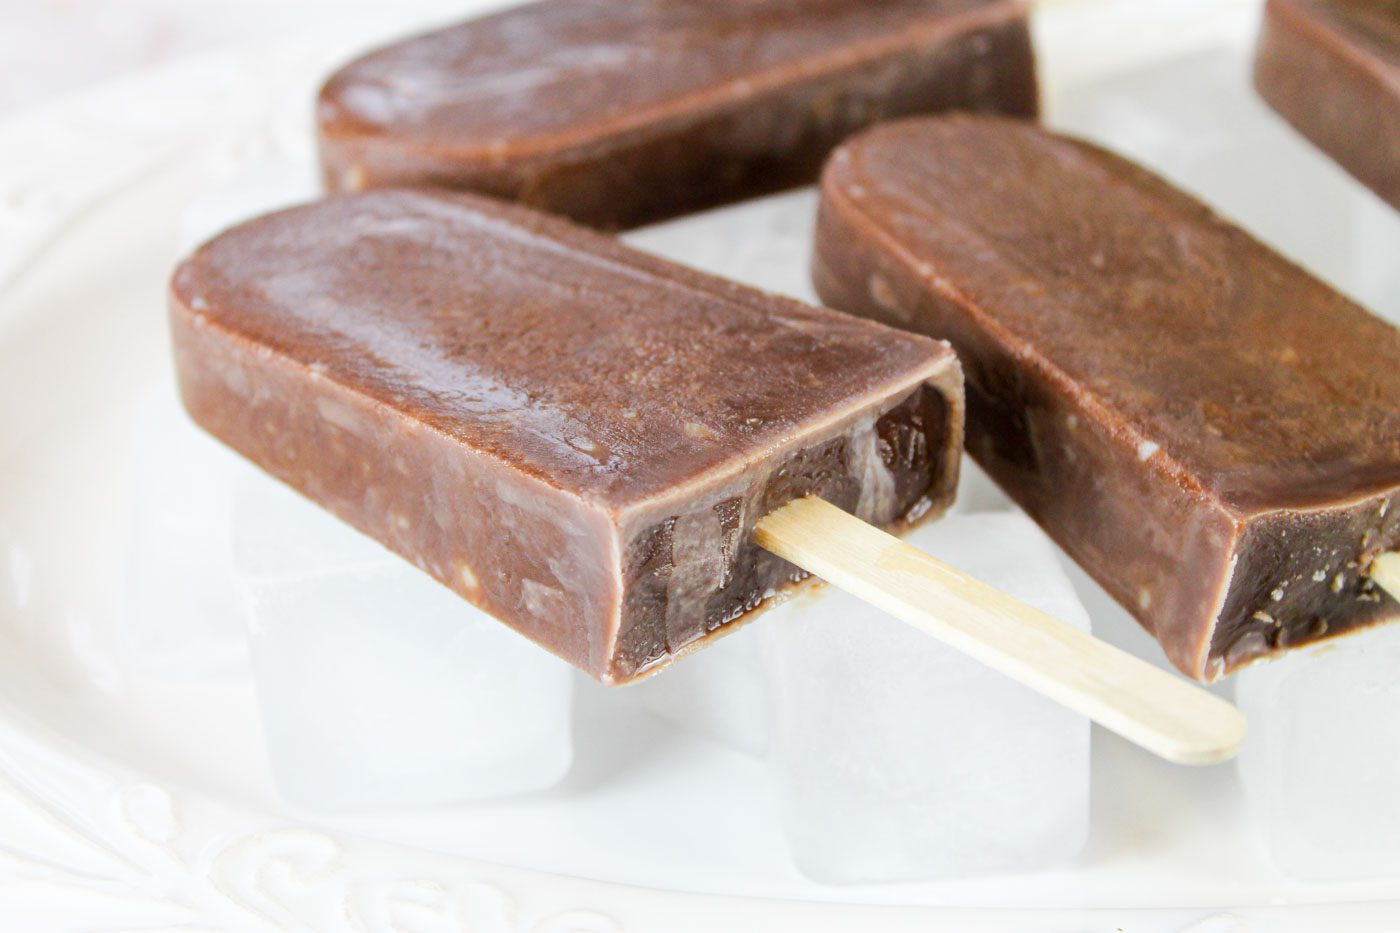 3 fudge pops sit on a bed of ice cubes